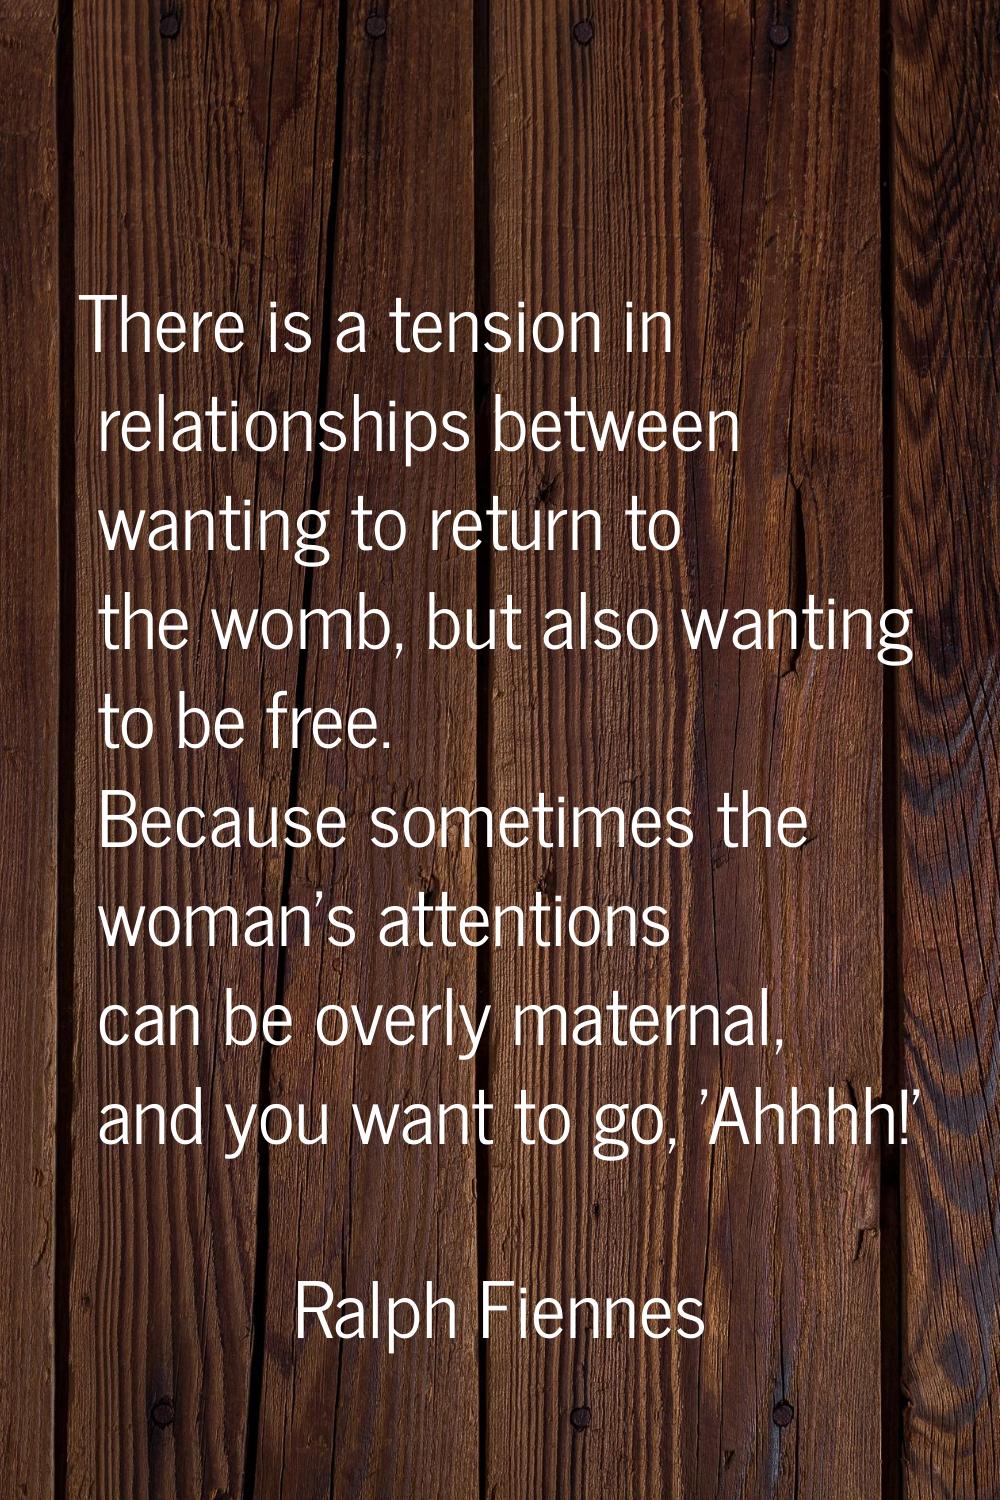 There is a tension in relationships between wanting to return to the womb, but also wanting to be f